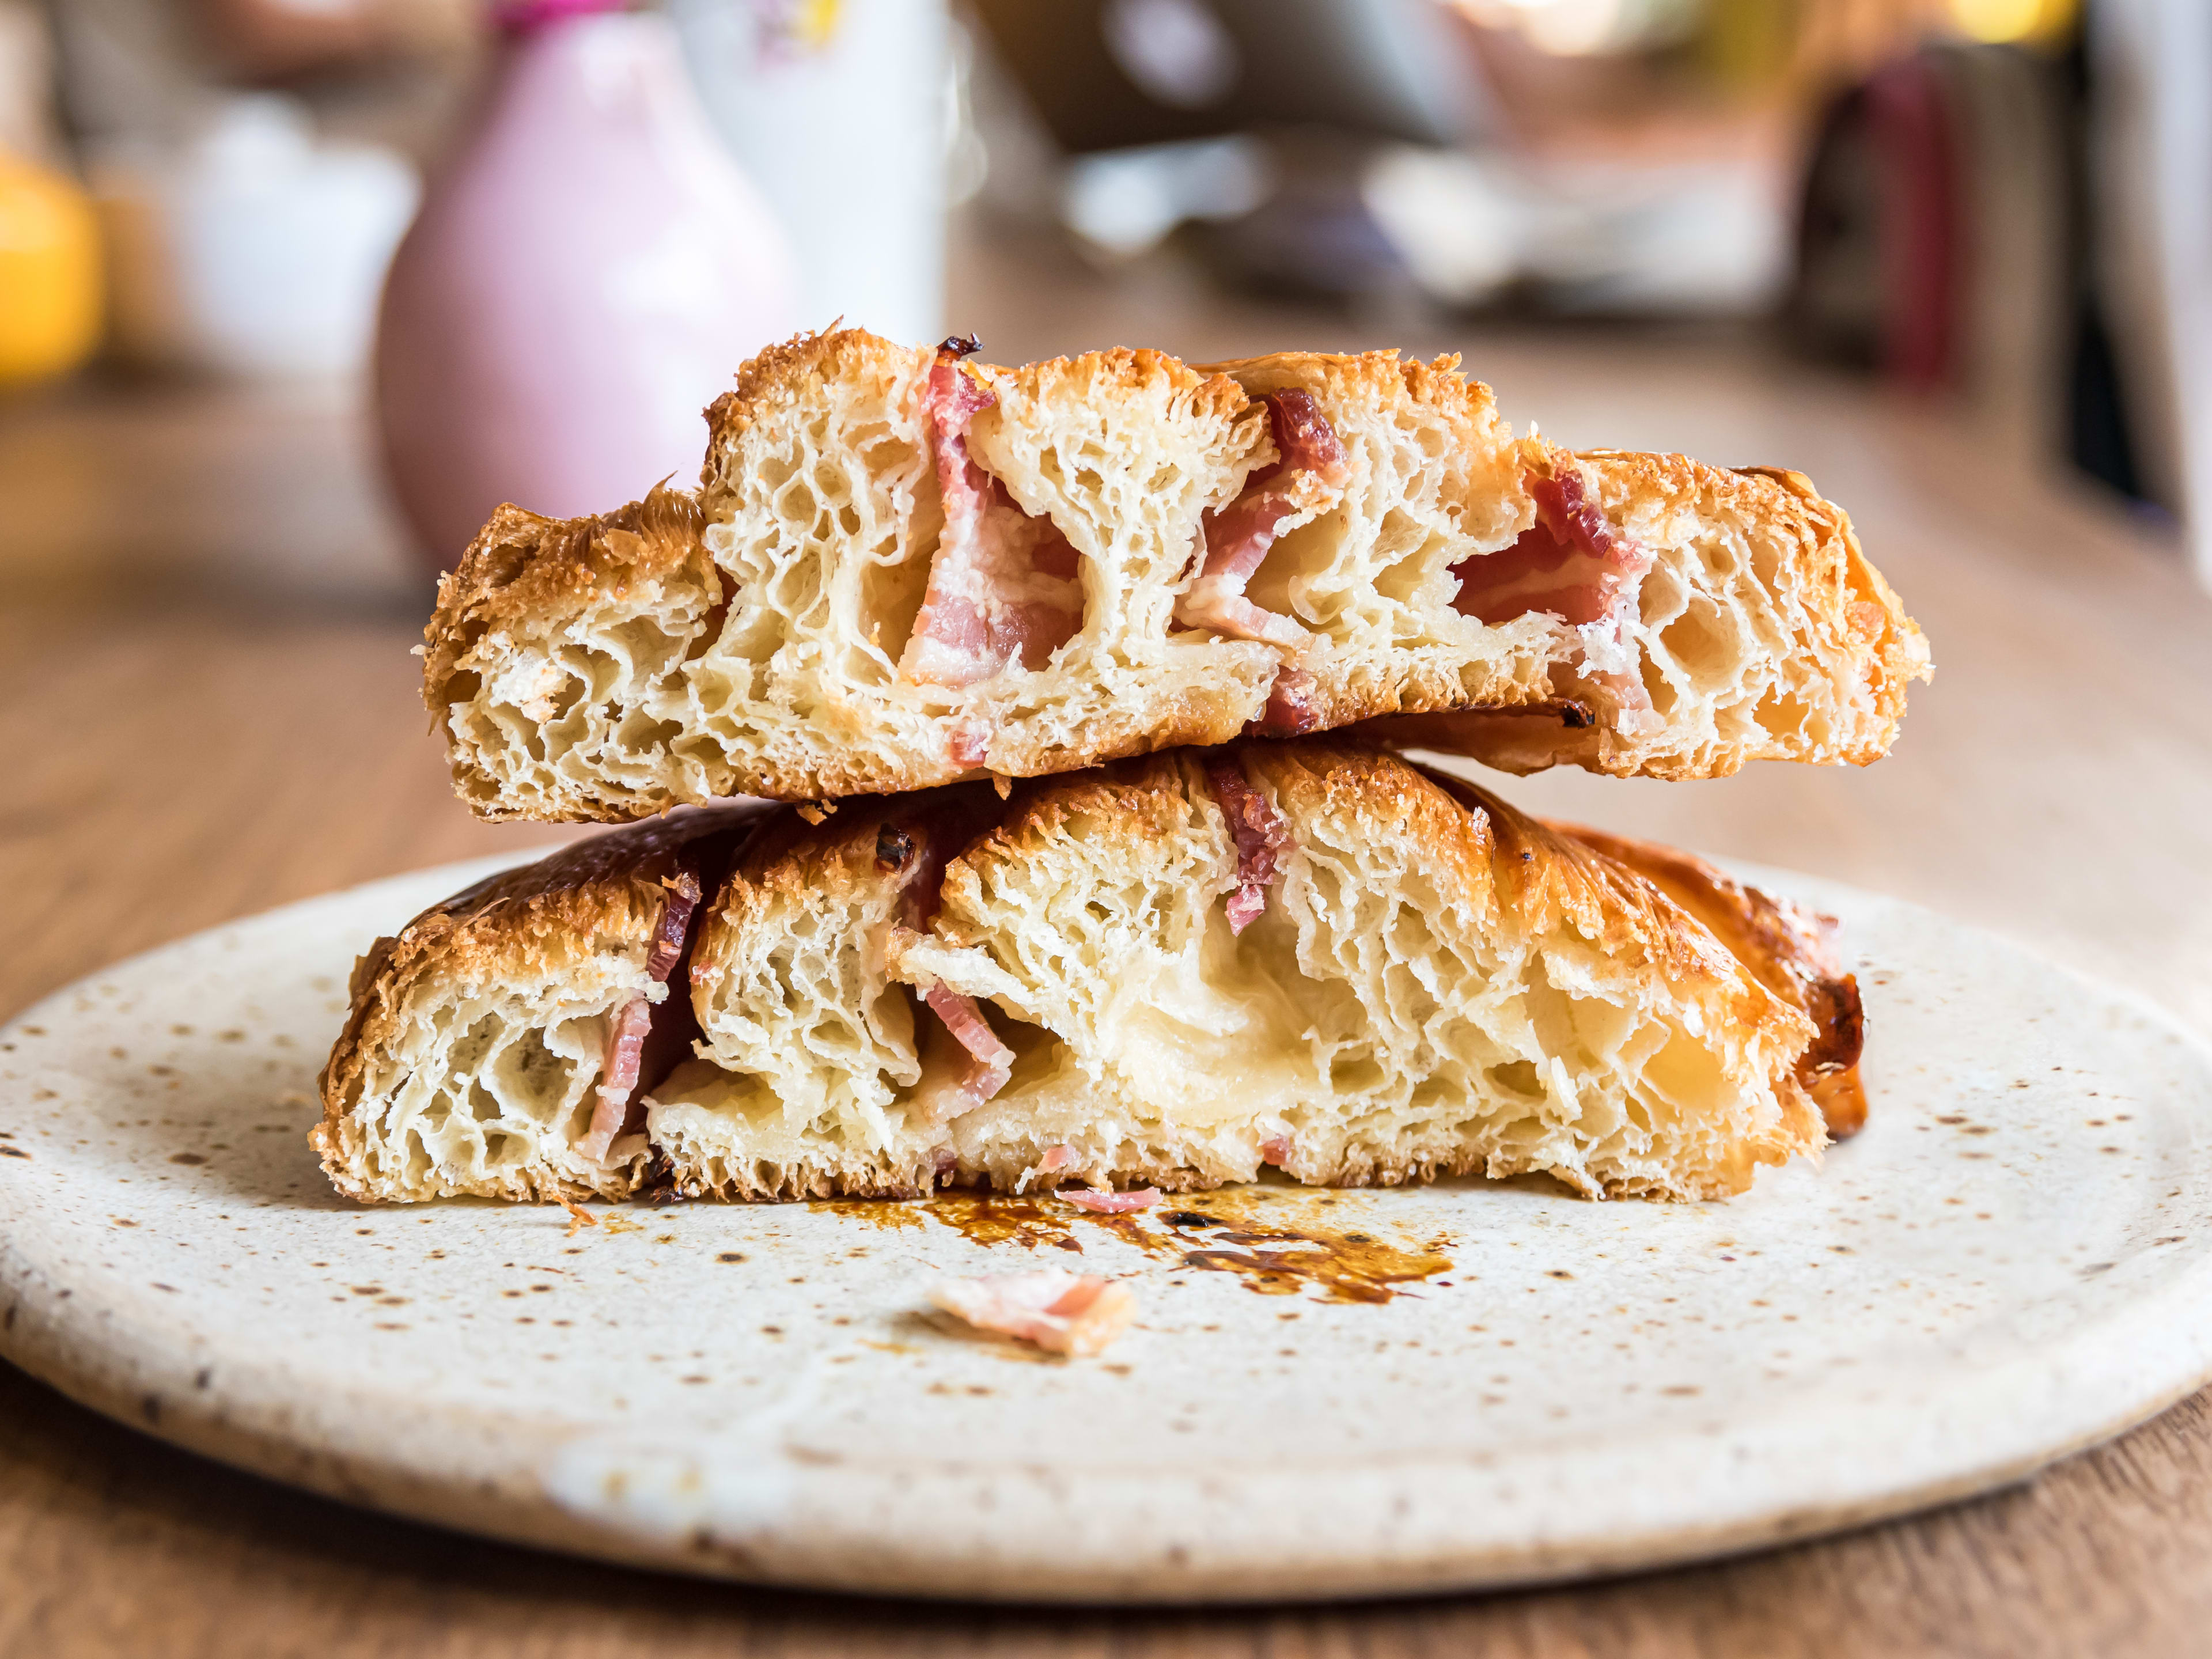 A cross section of the bacon and maple croissant from Pophams.